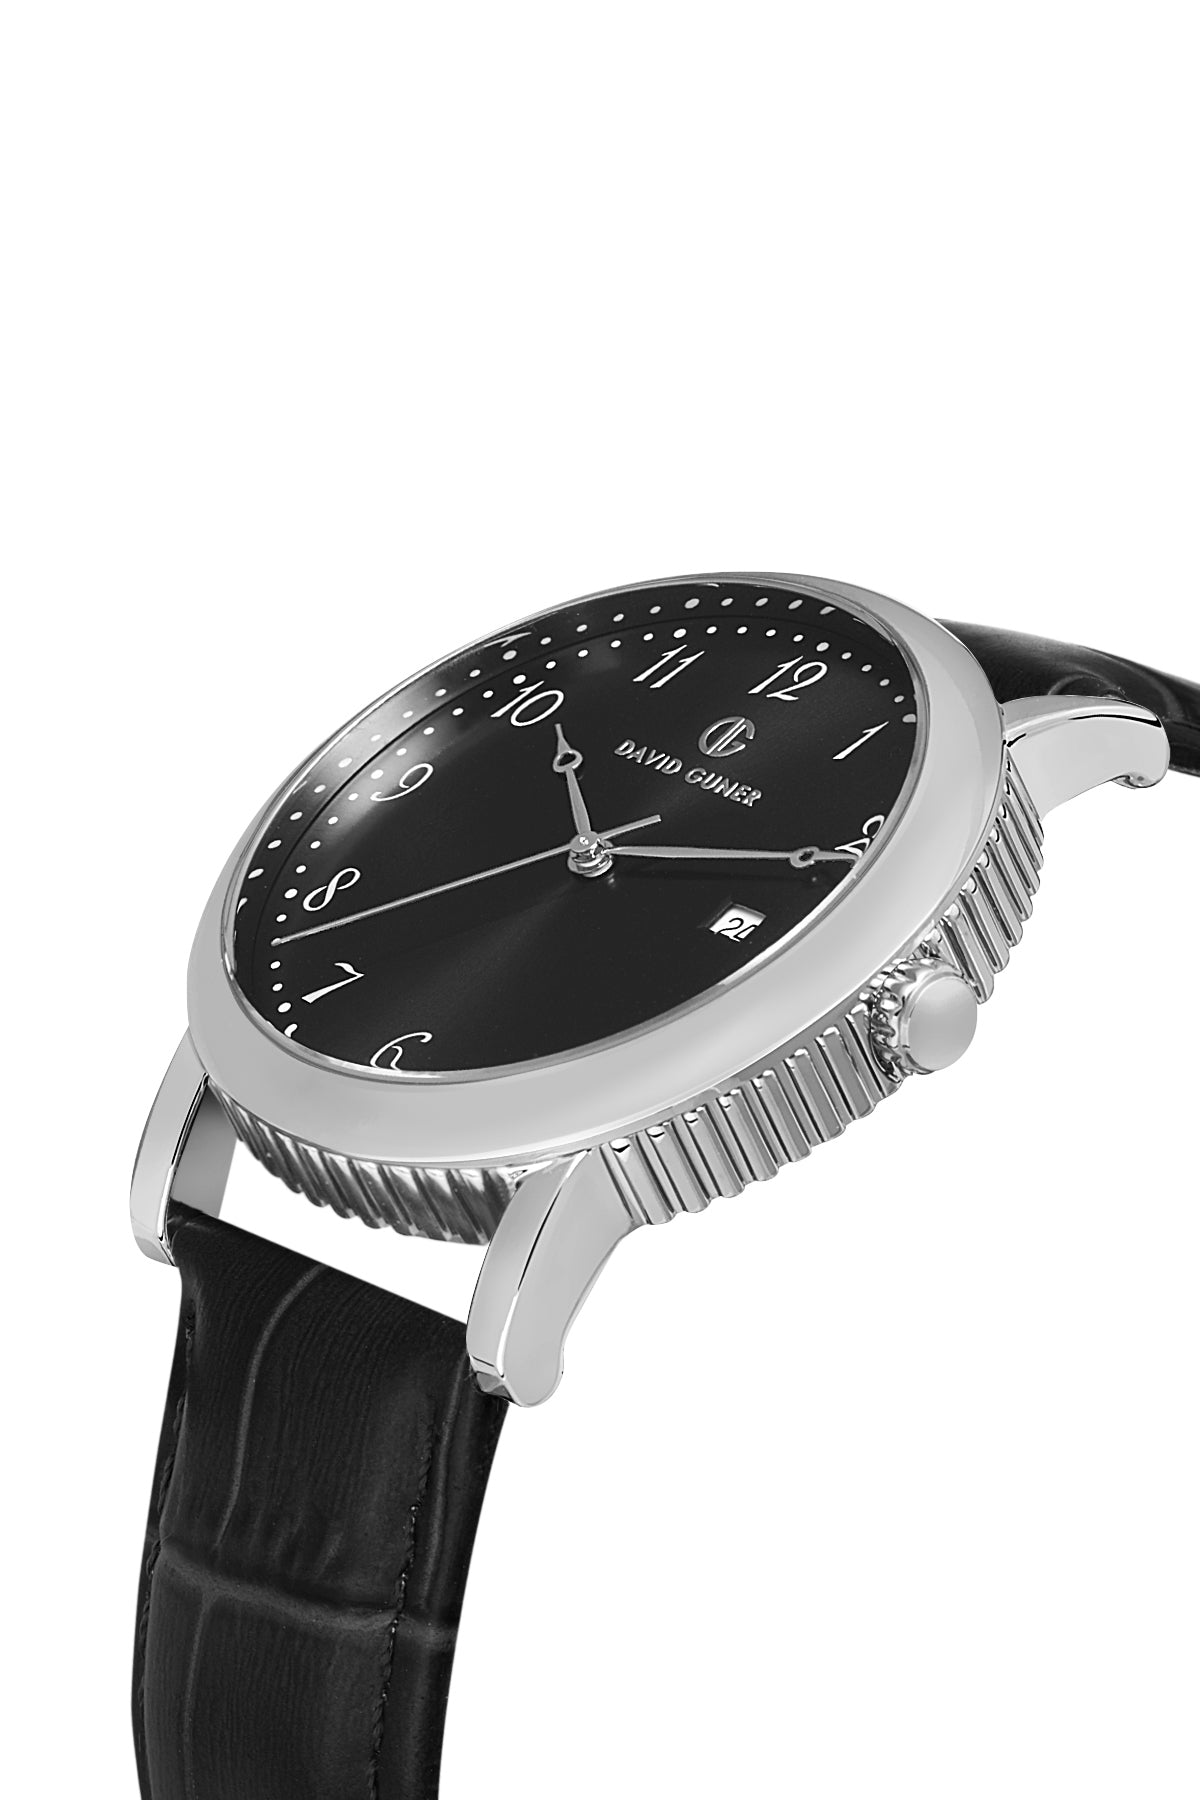 DAVID GUNER Silver Plated Men's Watch with Black Strap and Original Leather Strap